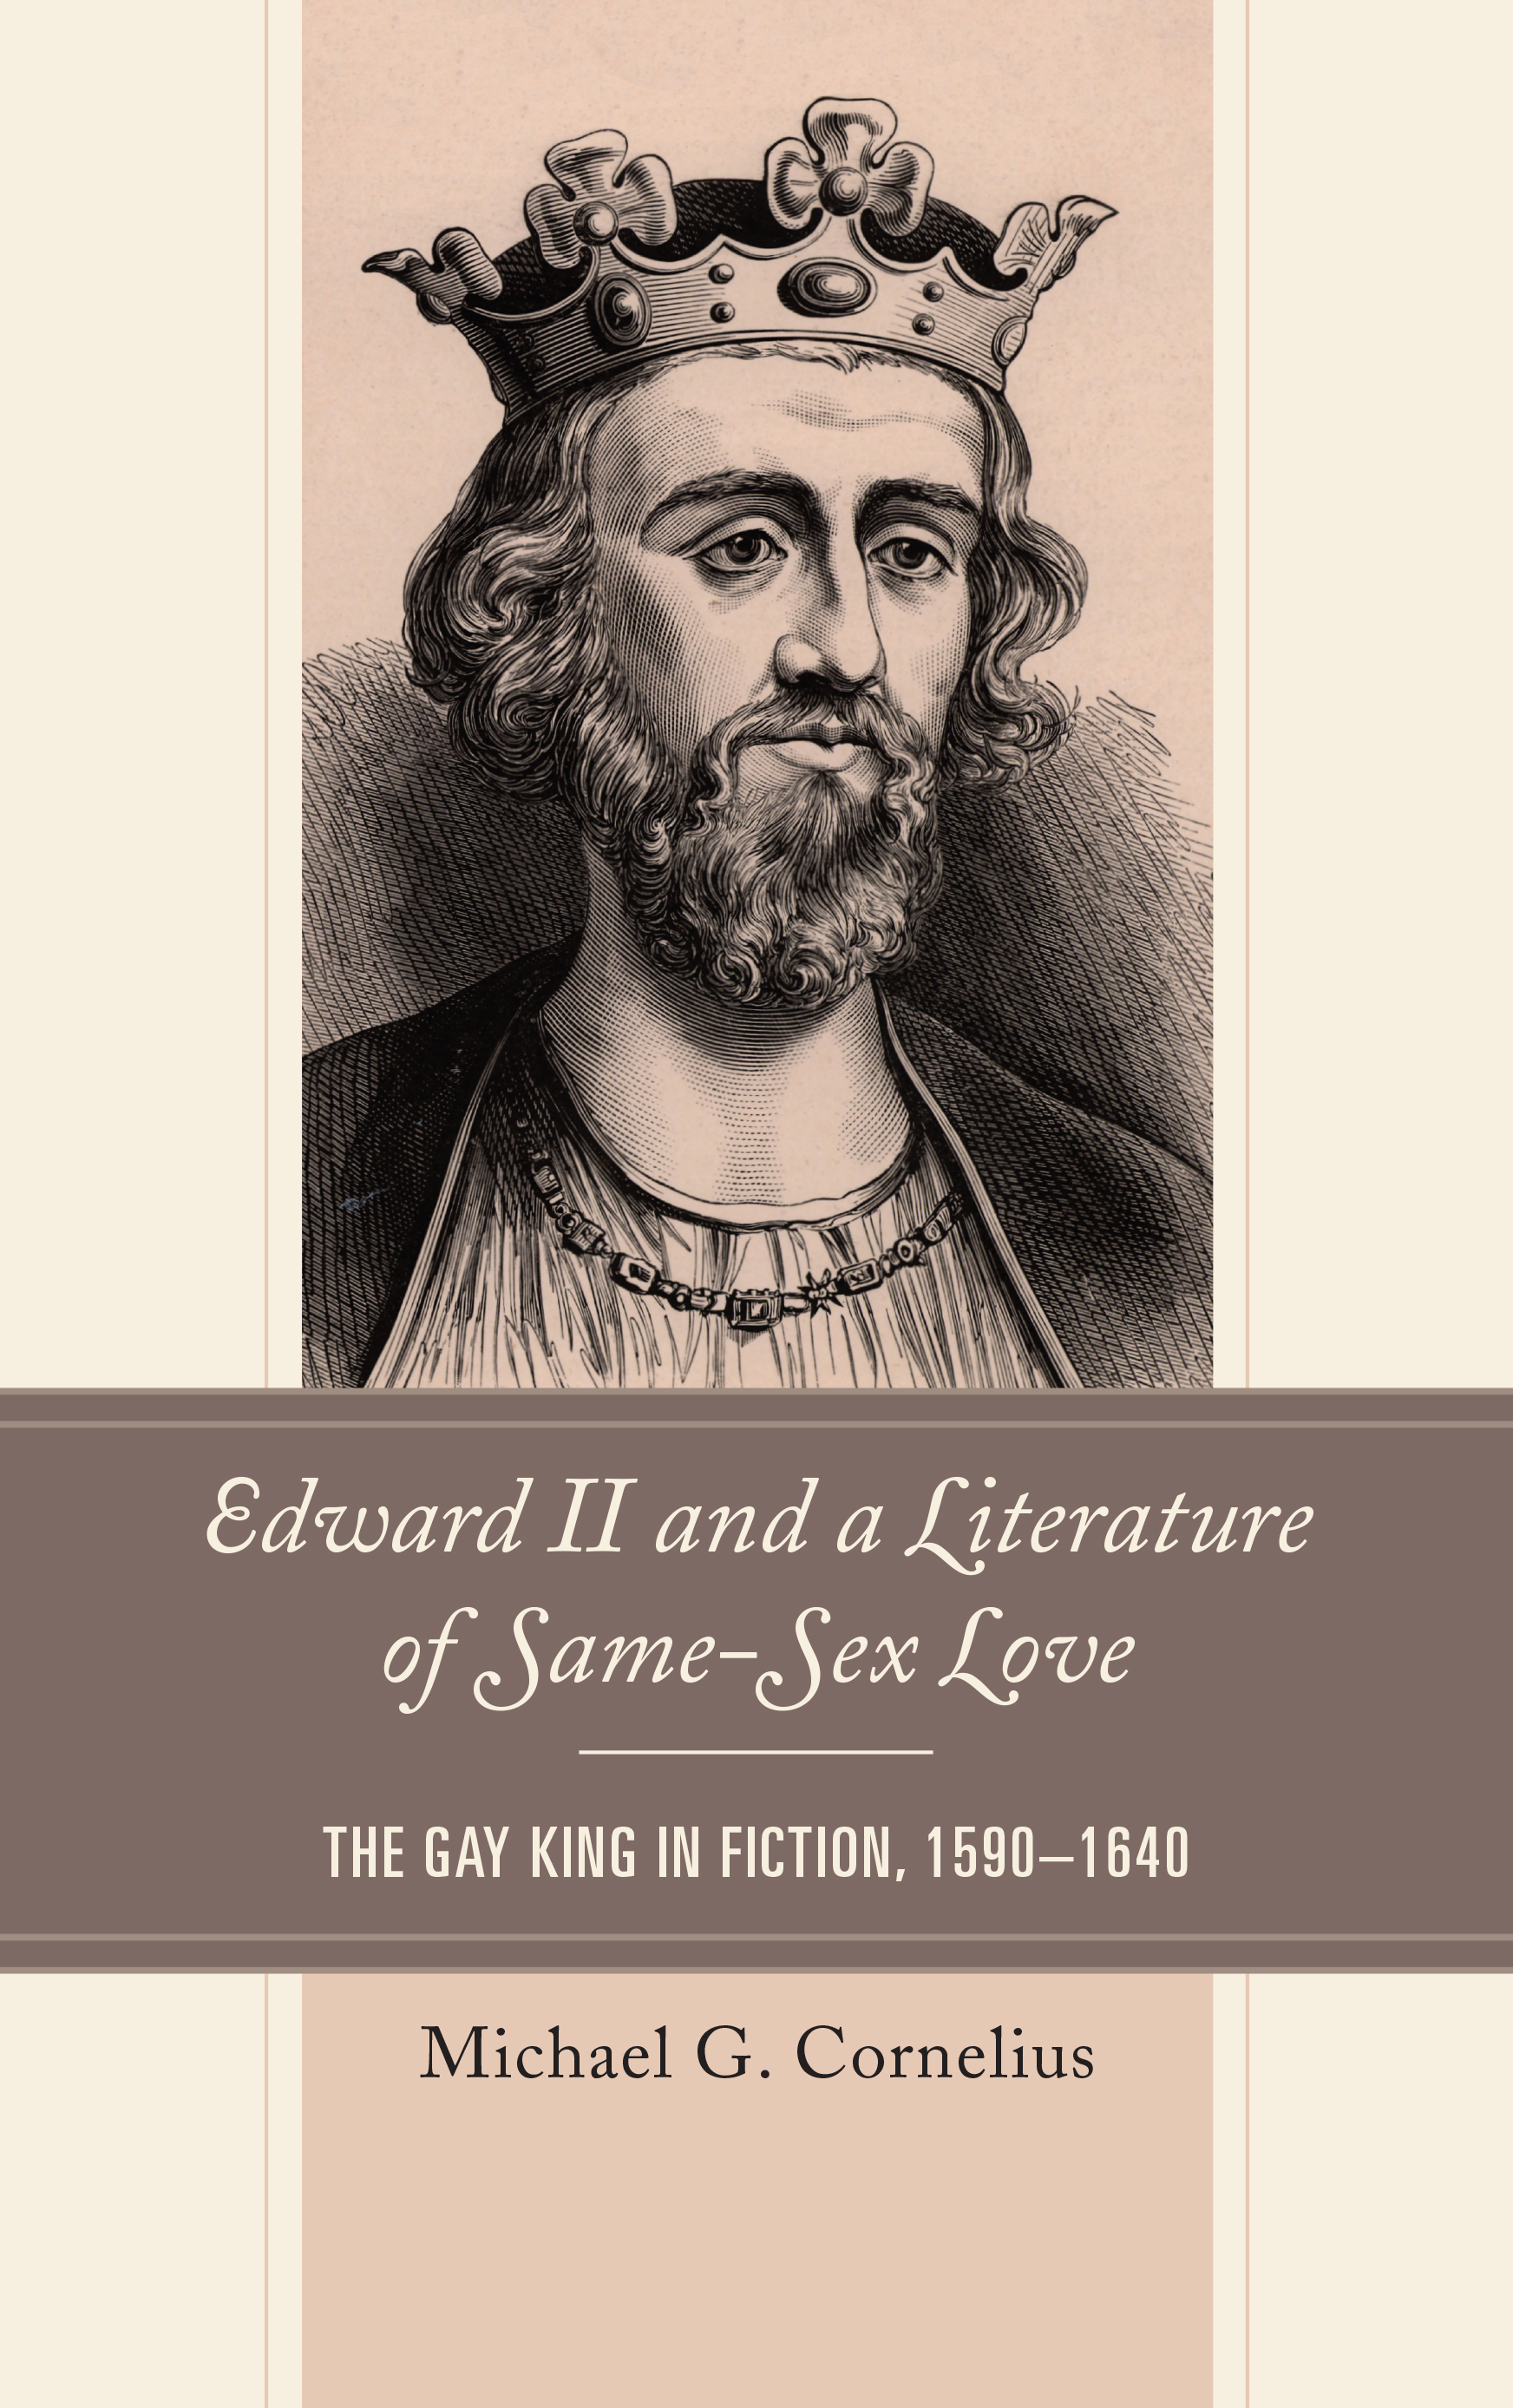 Edward II and a Literature of Same-Sex Love: The Gay King in Fiction, 1590–1640